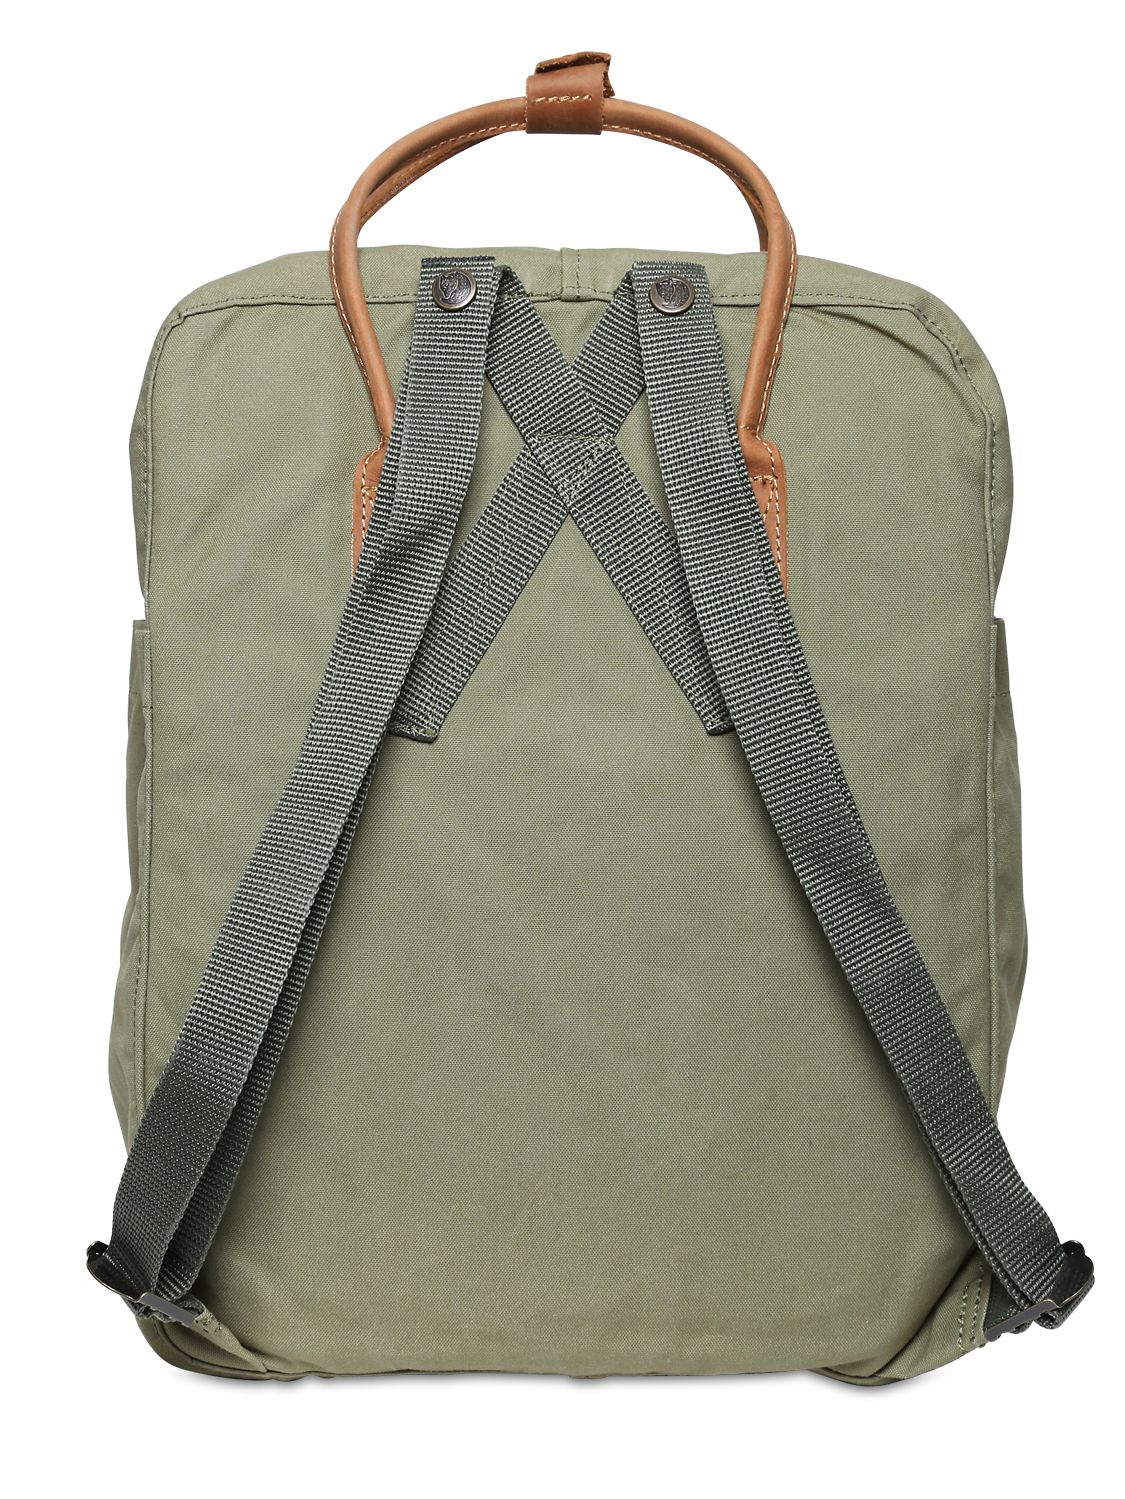 Fjallraven 16 L Kanken Canvas & Leather Backpack in Military Green (Green) - Lyst